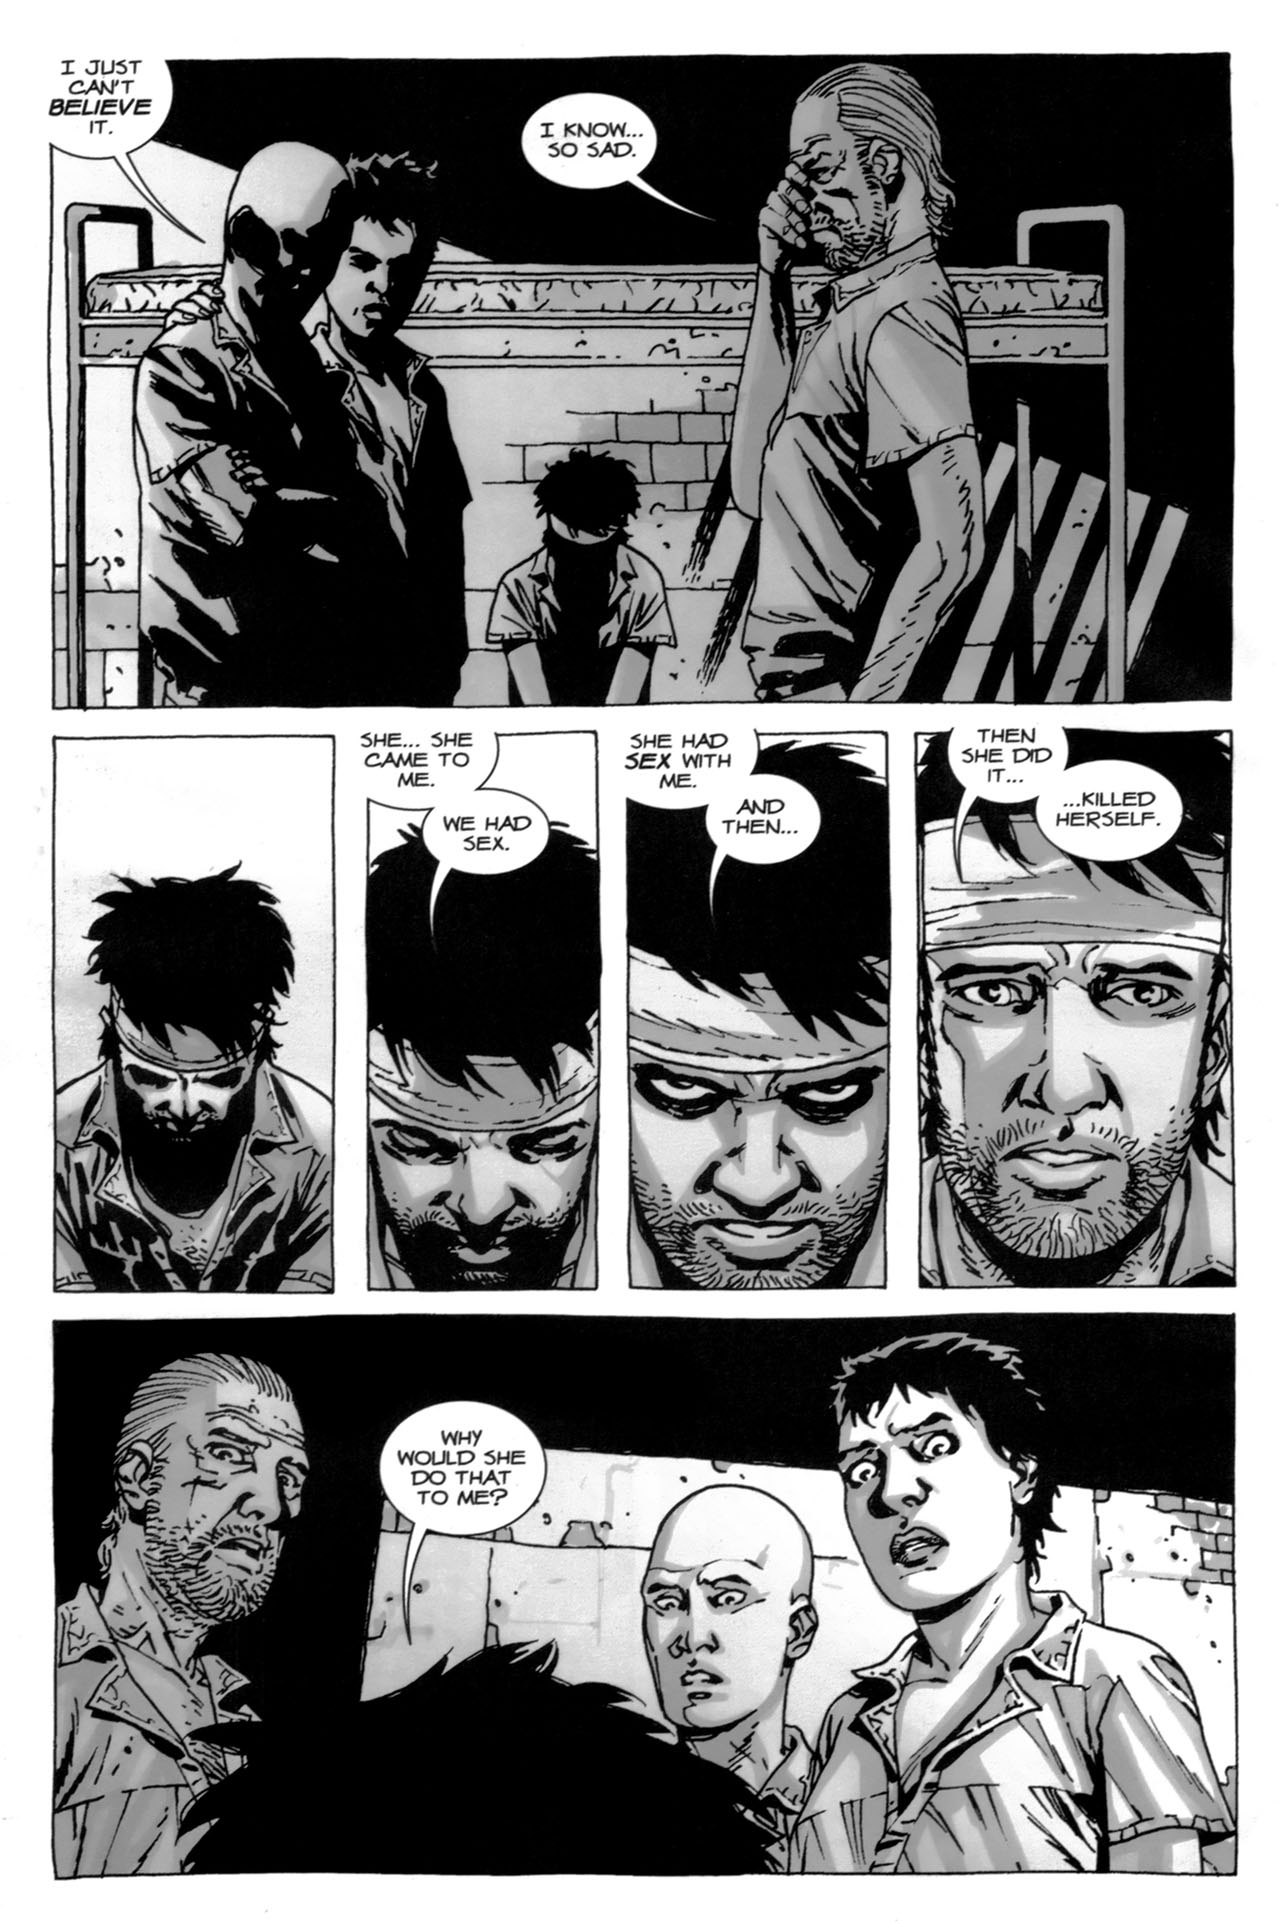 walking dead - I Just Can'T Believe It. I Know... 30 Sad. ware She... She Came To She Had Sex With Me. And Then... Then She Did It... Me. ...Killed Herself We Had Sex. Surved peale care Why Would She Do That To Me? 2.5